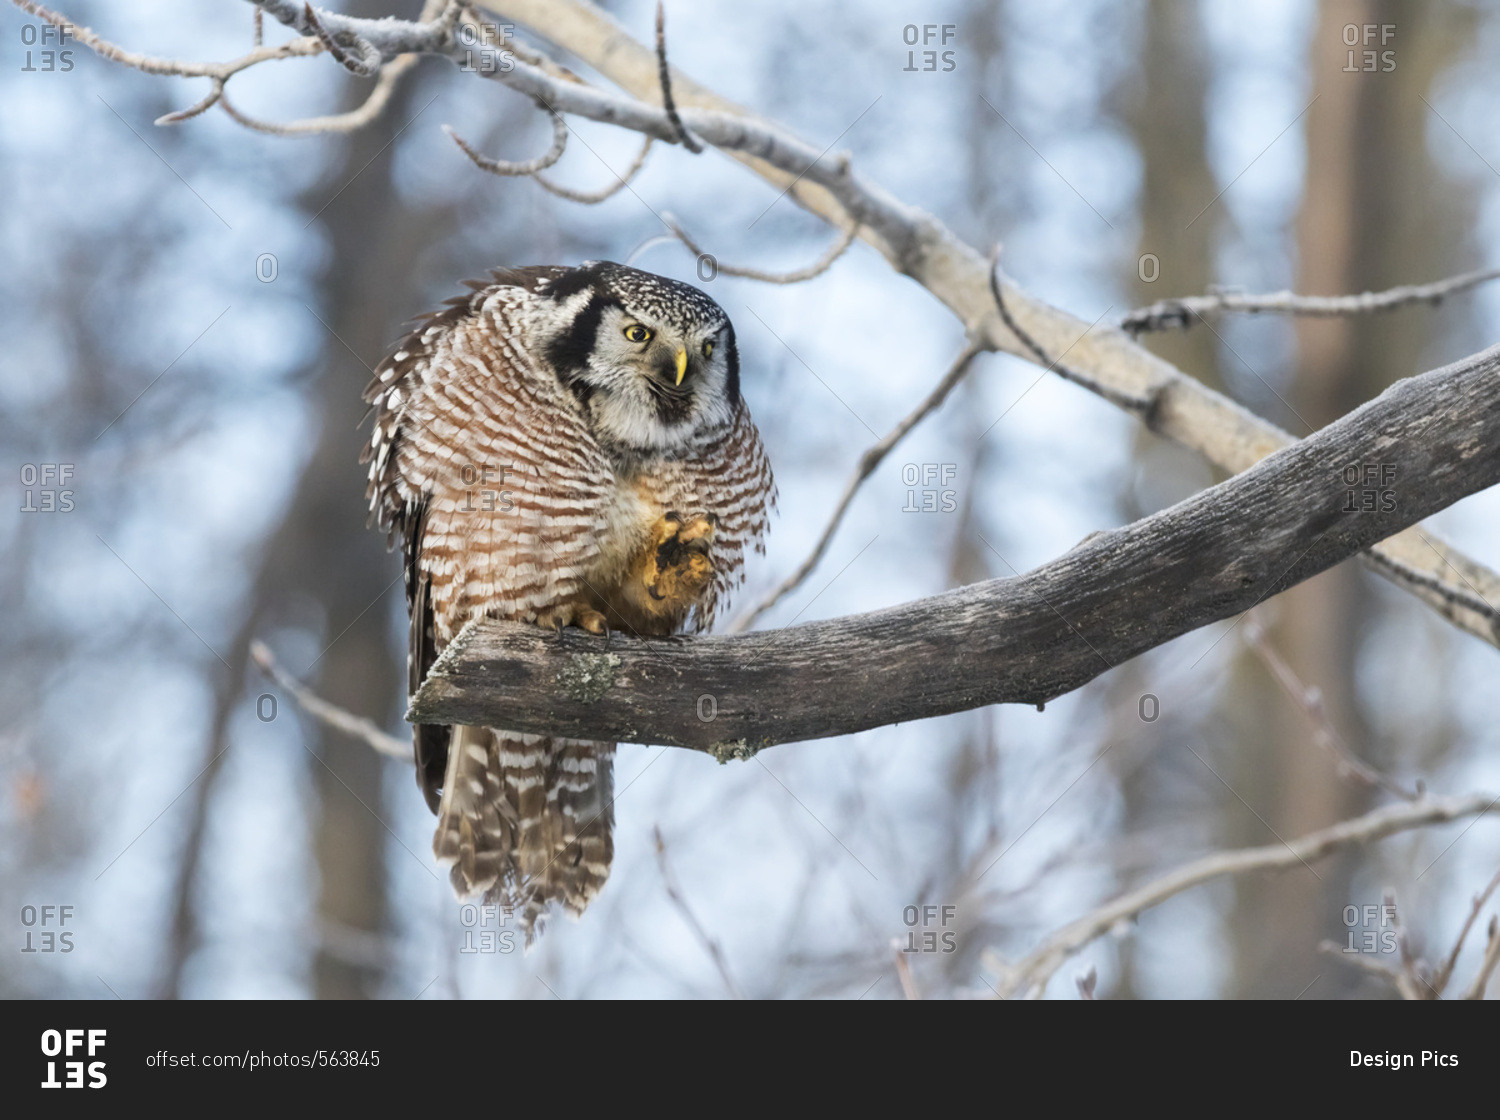 Hawk Owl (Surnia ulula) hunting for vole near the Anchorage Airport in winter, south-central Alaska, Alaska, United States of America